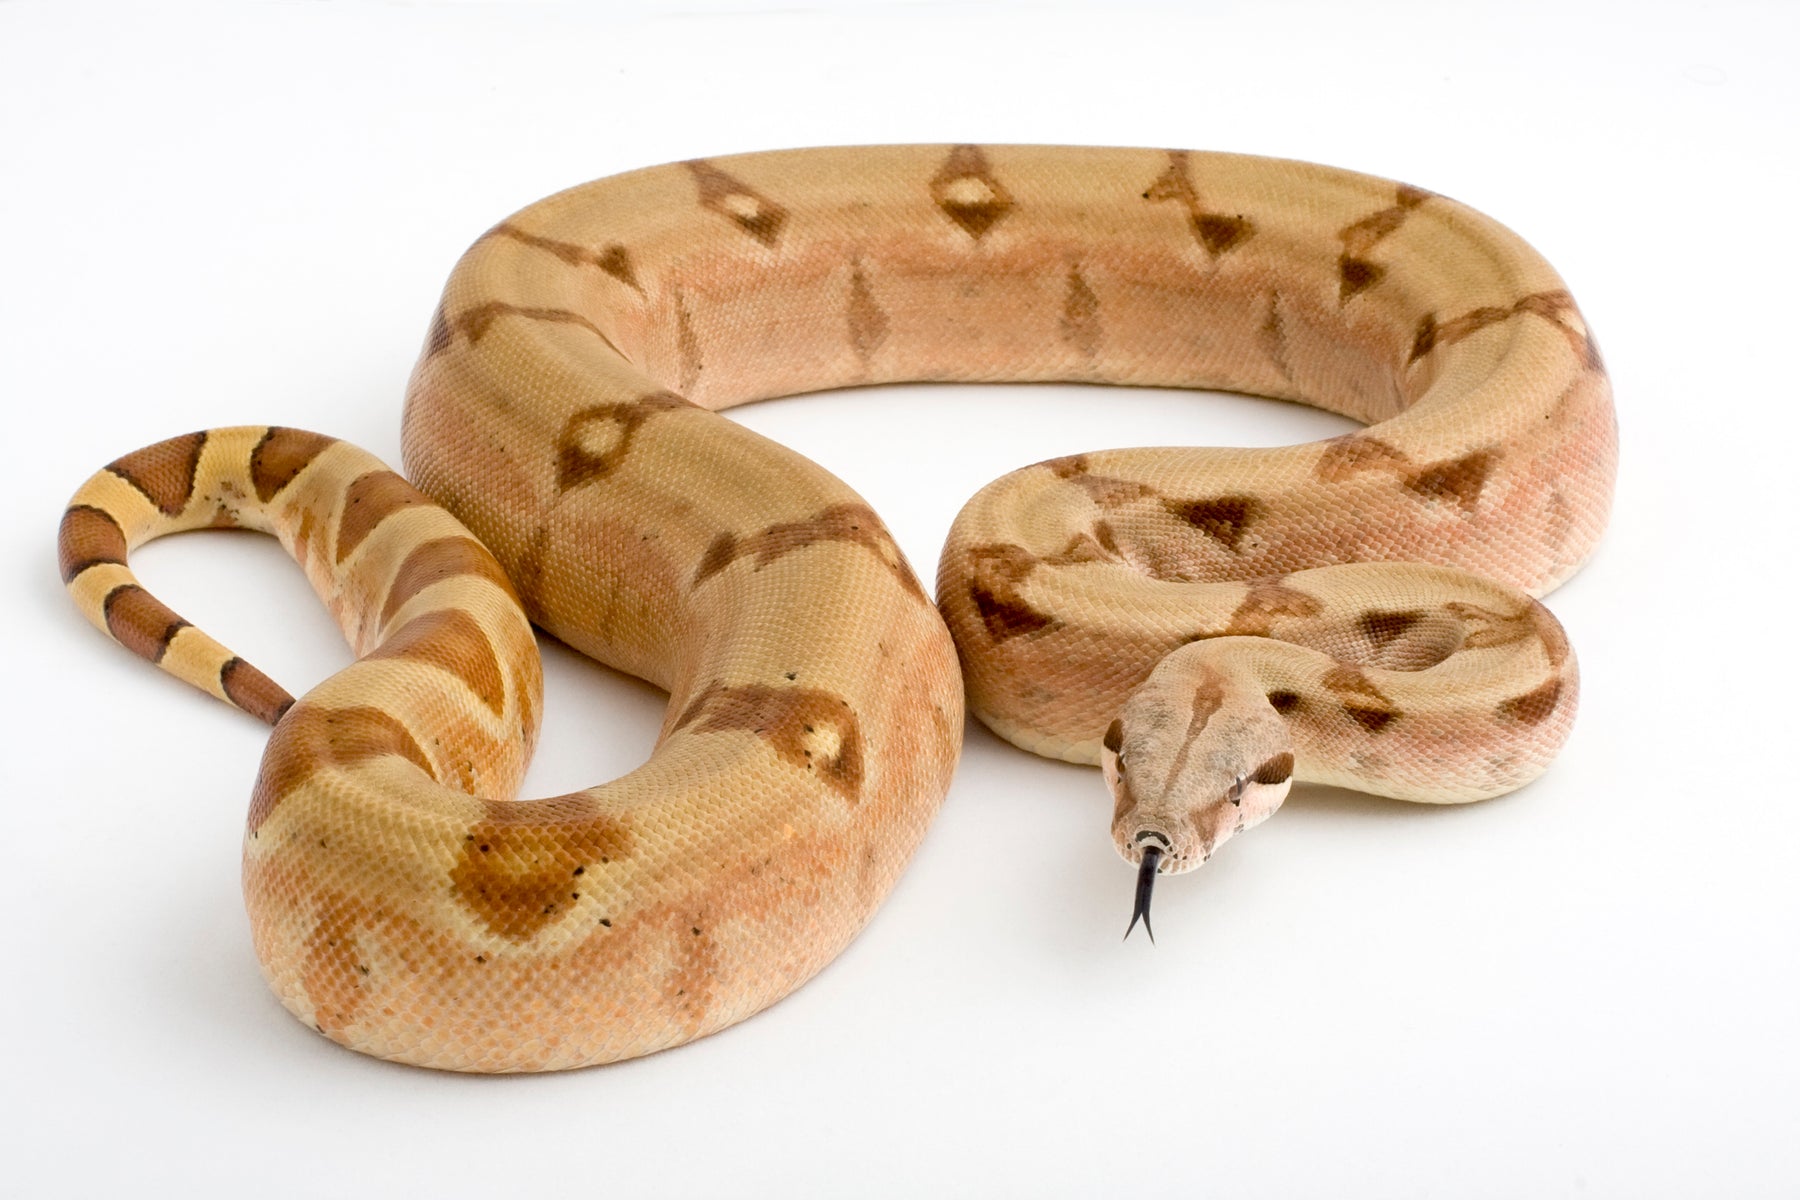 How to Care for Your Boa Constrictor